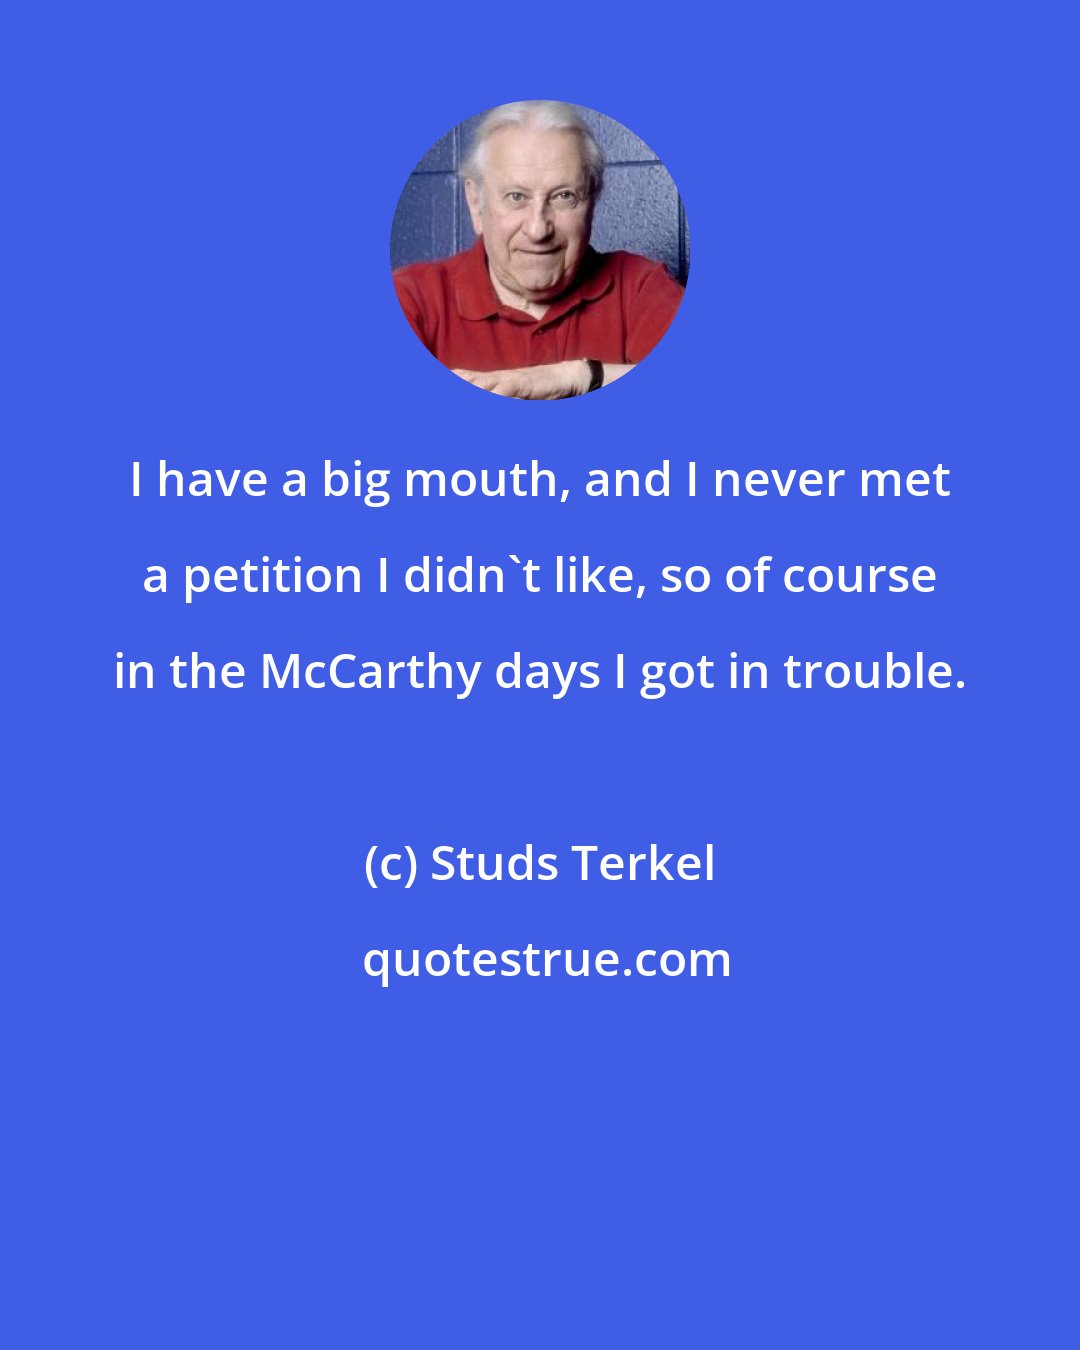 Studs Terkel: I have a big mouth, and I never met a petition I didn't like, so of course in the McCarthy days I got in trouble.